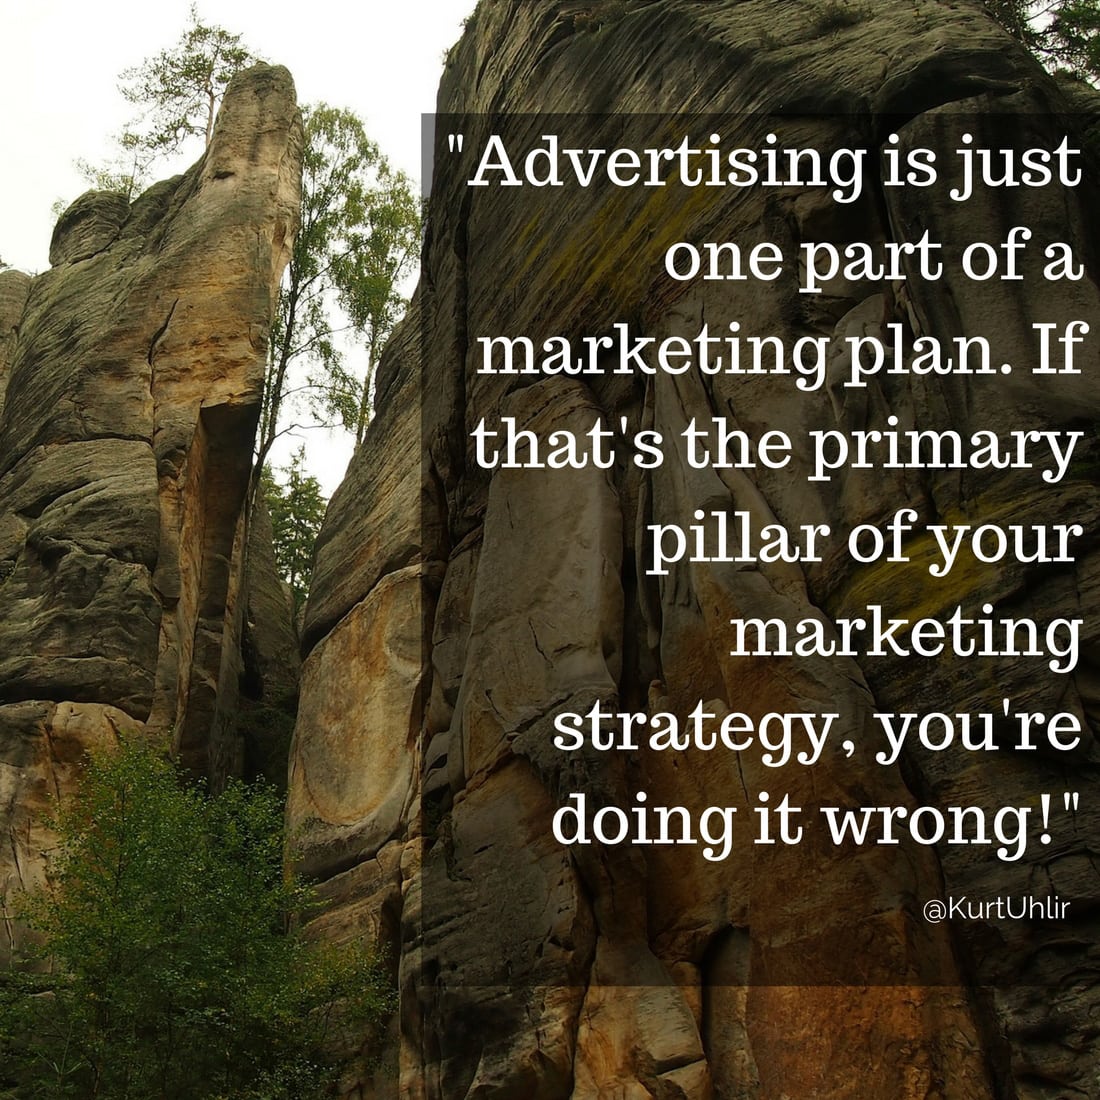 Advertising is just one part of a marketing plan. If that's the primary pillar of your marketing strategy, you're doing it wrong! - Kurt Uhlir marketing quote